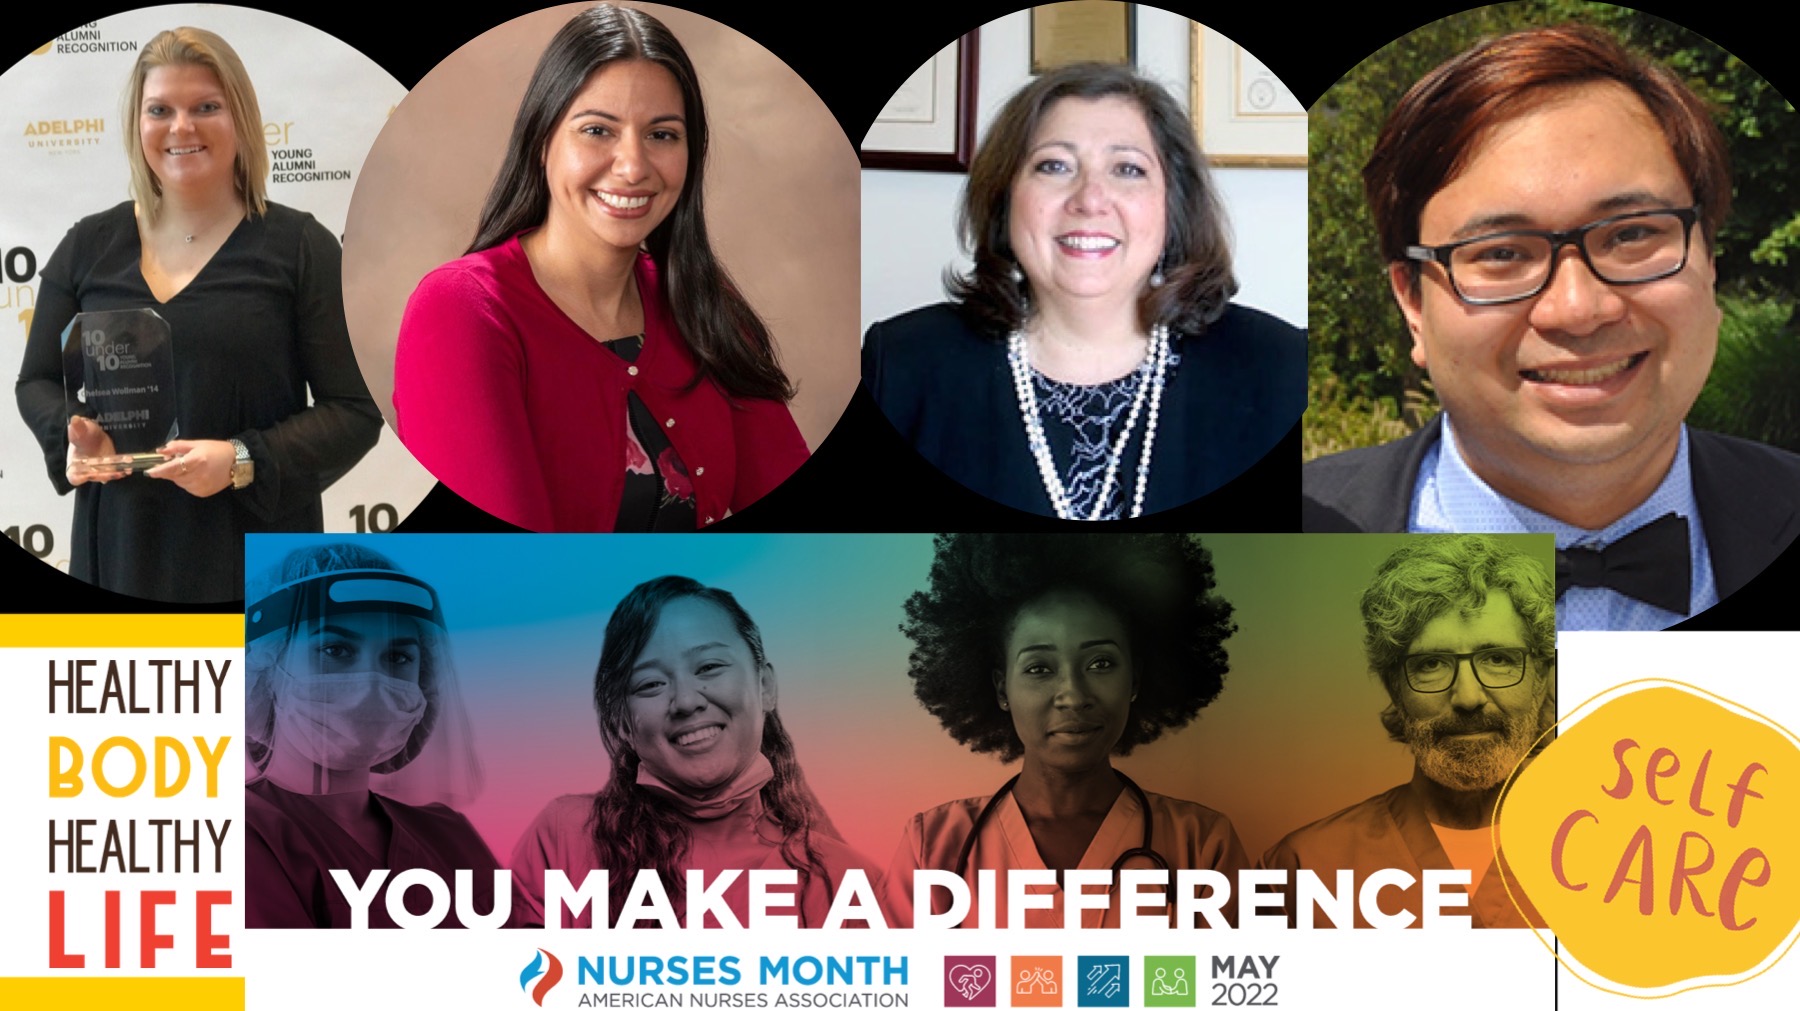 you make a difference - a collage with Adelphi nursing faculty and alumni